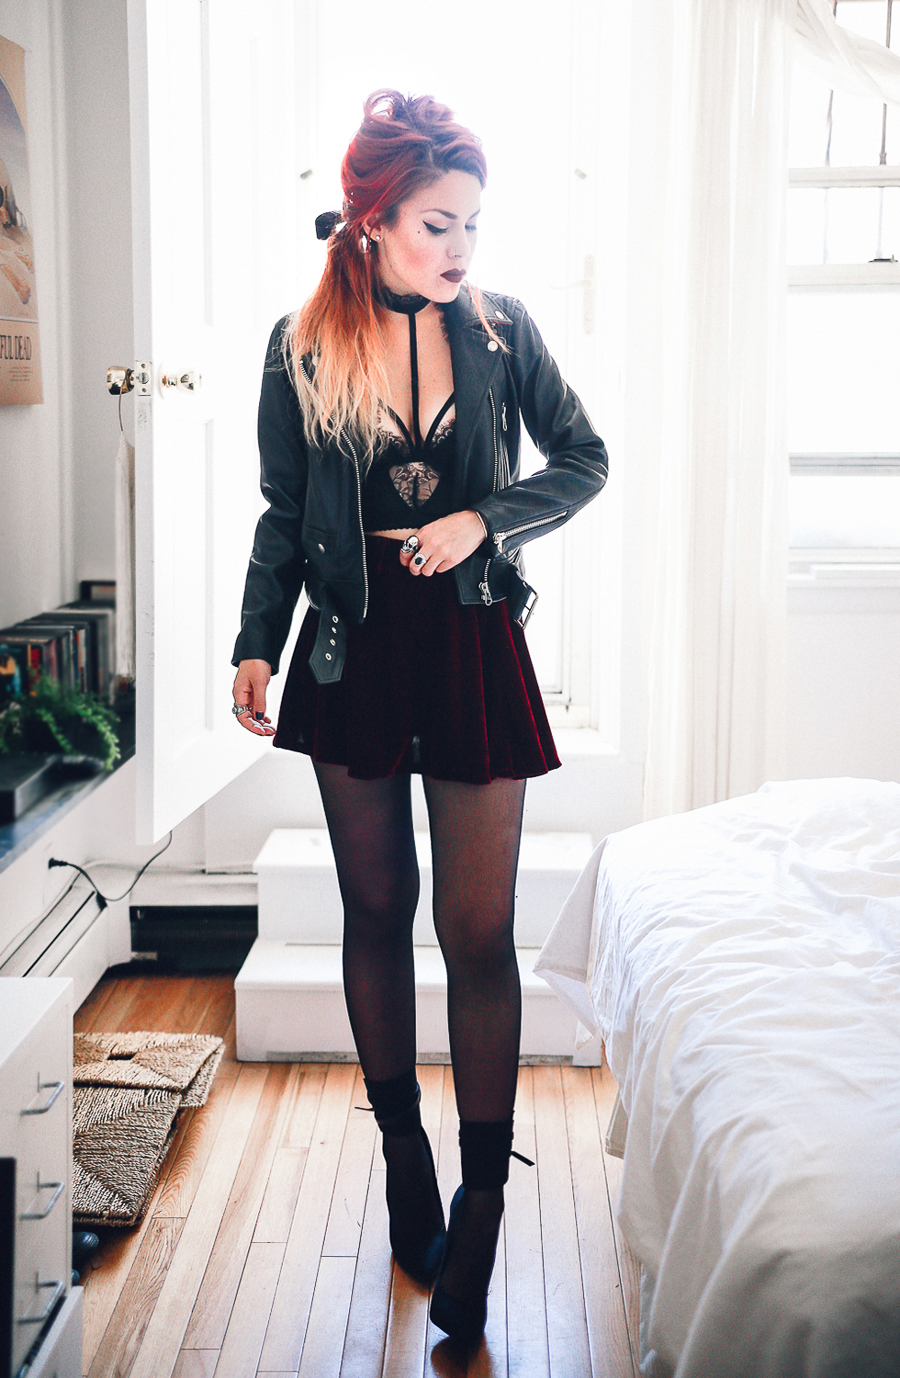 Le Happy wearing Courtney Love x Nasty Gal collection